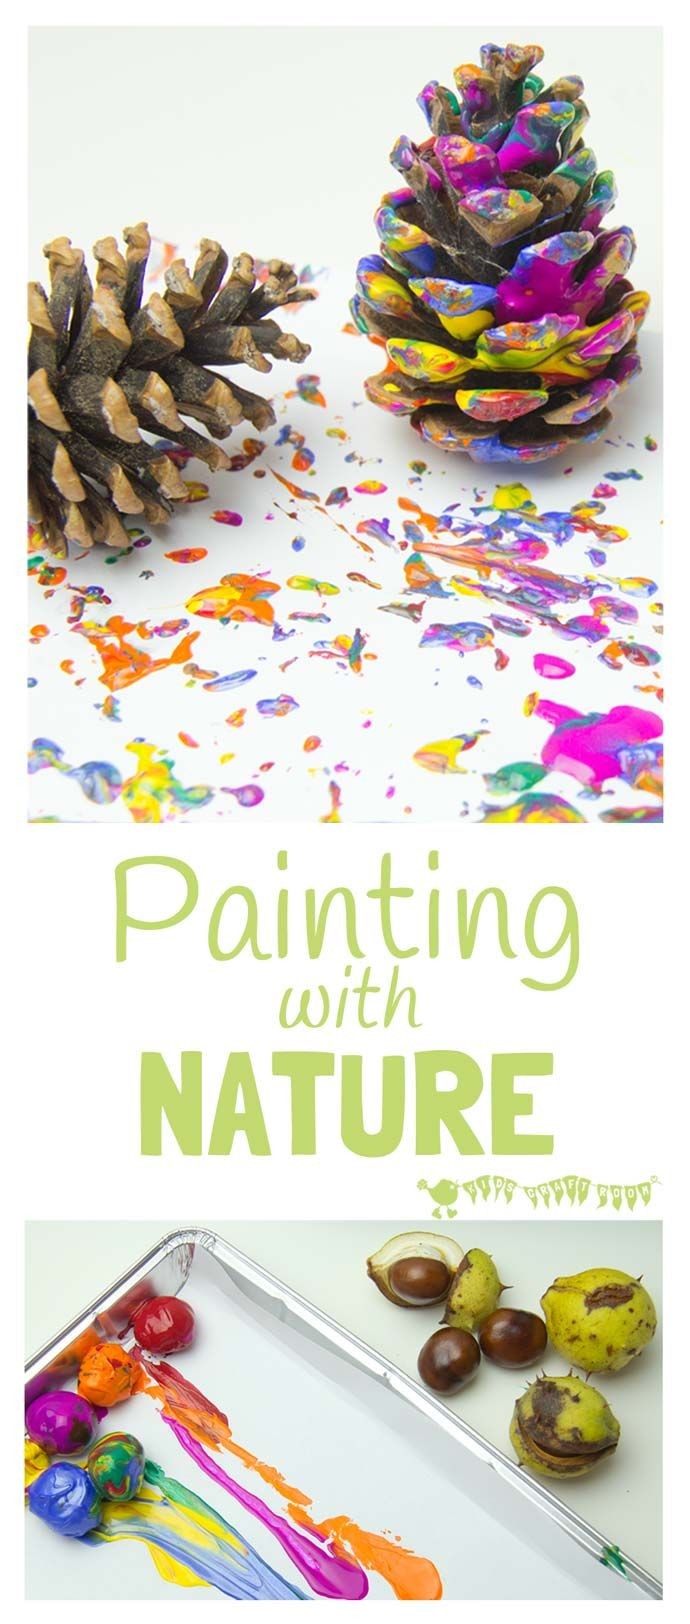 Painting with Nature is an exciting and simple pro...